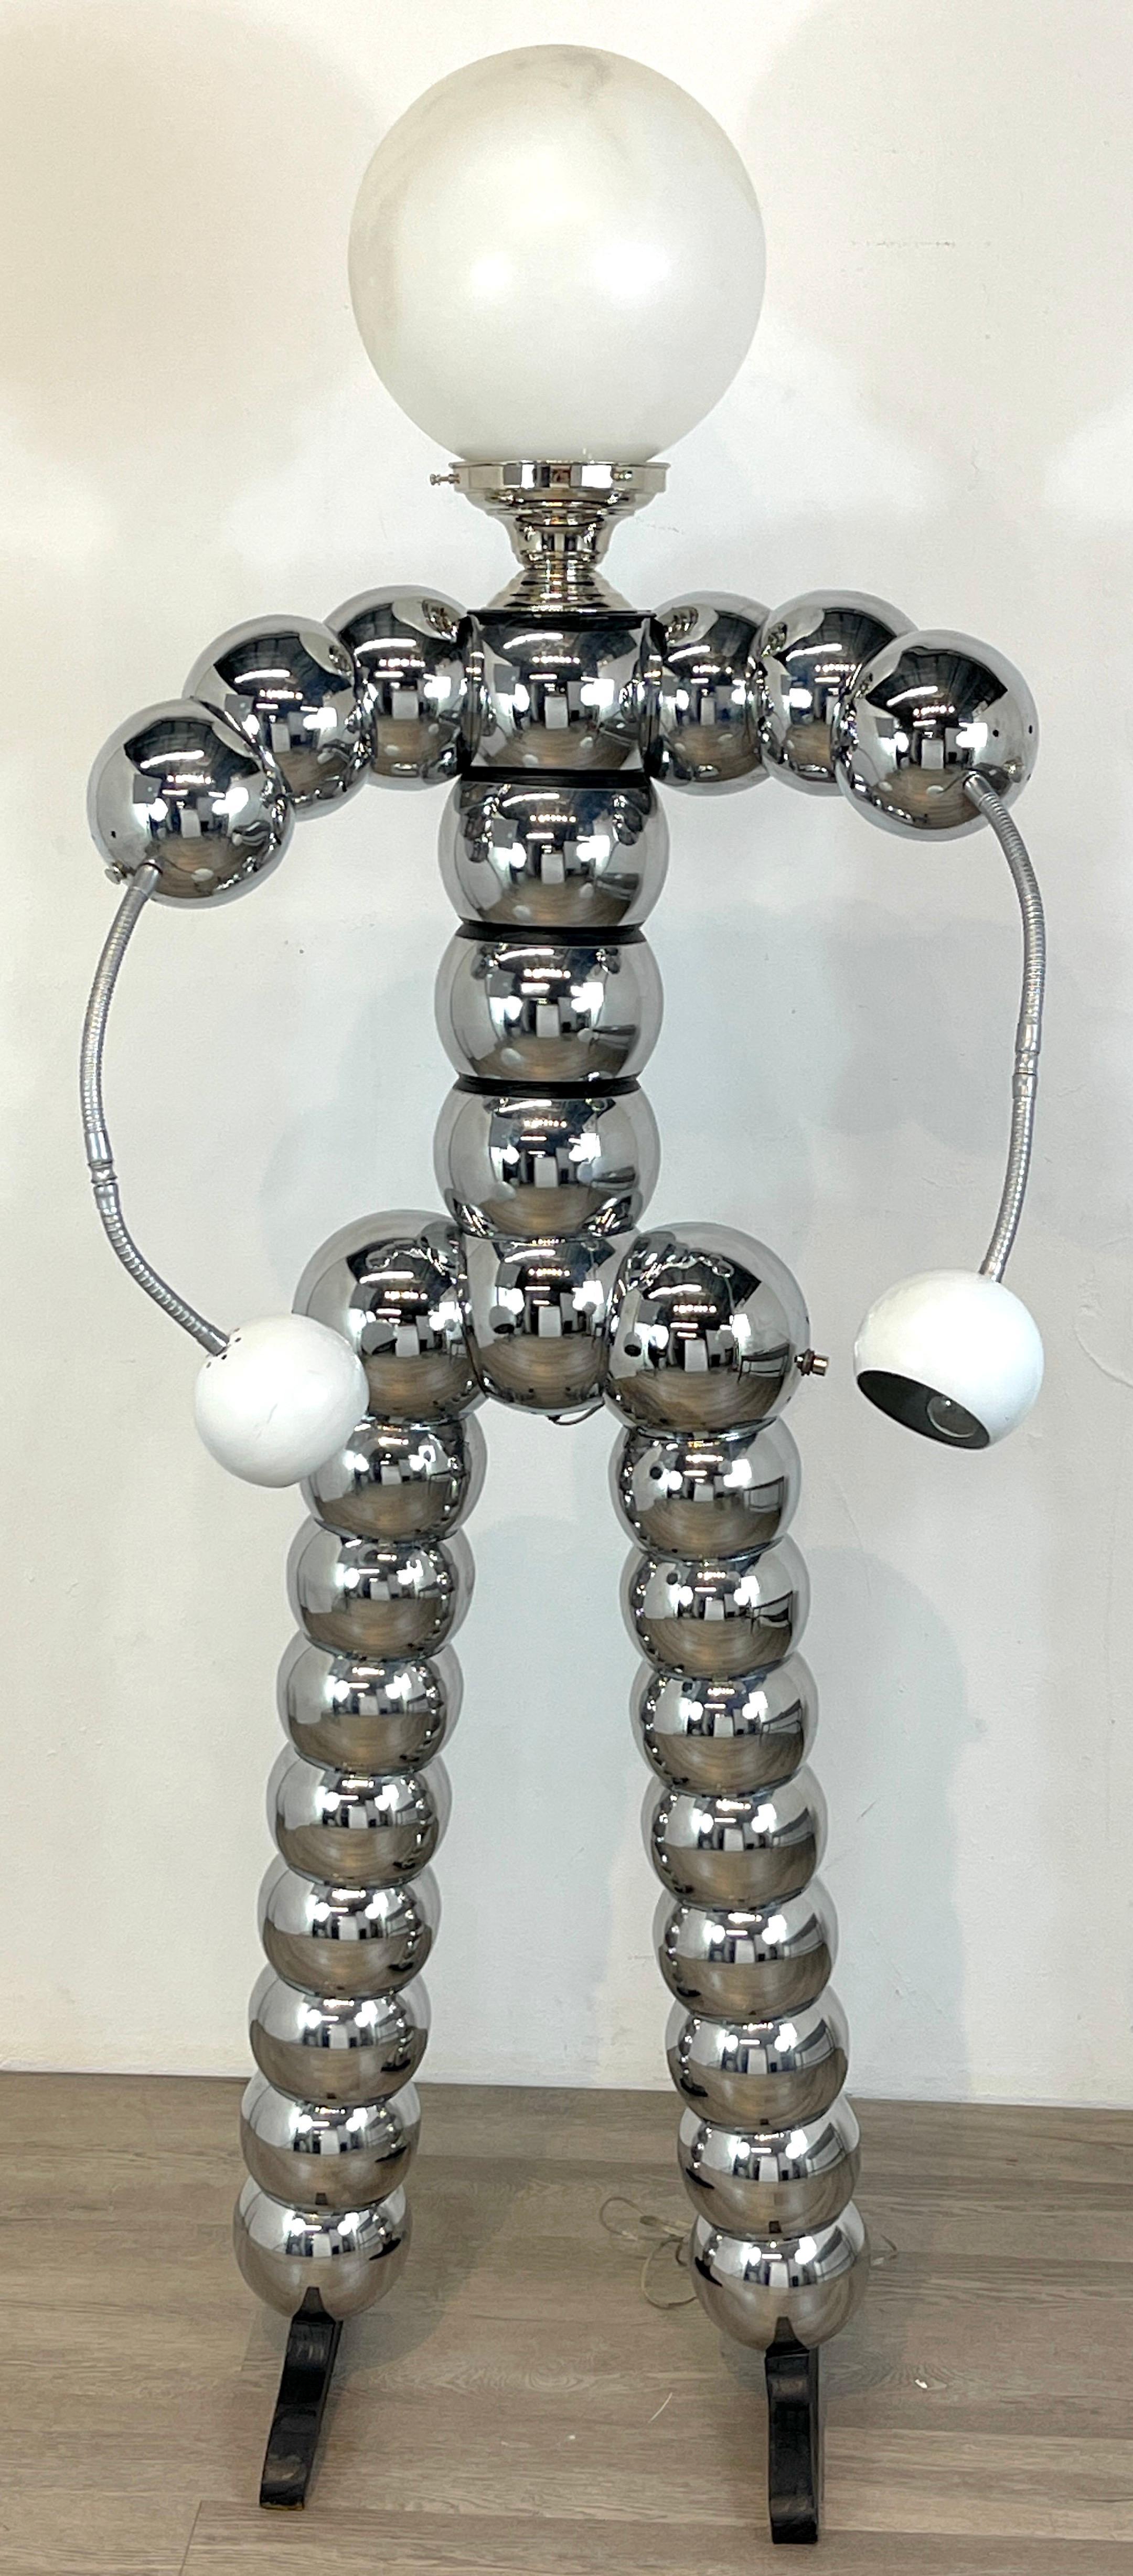 Chrome Stacked Ball Articulated Robot Floor Lamp Attributed to George Kovacs 6